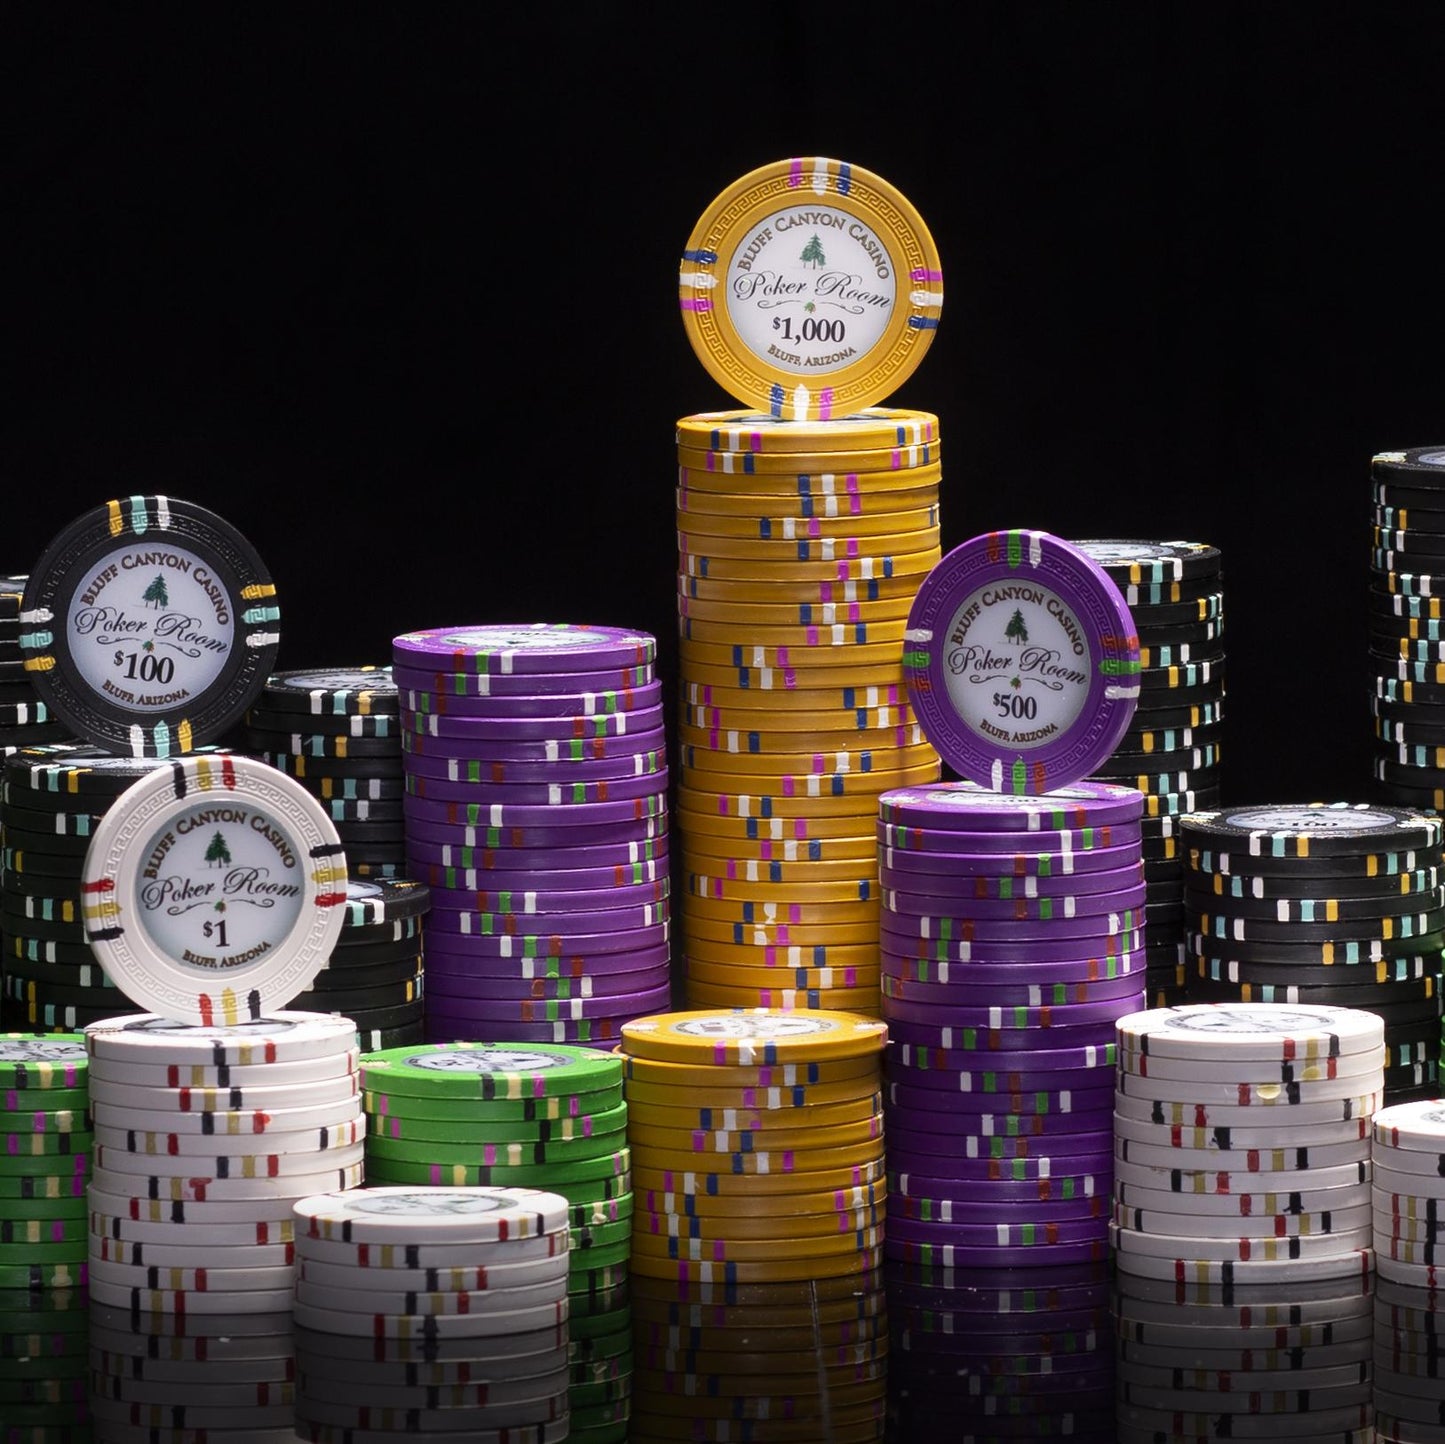 600 Bluff Canyon Poker Chips with Acrylic Carrier